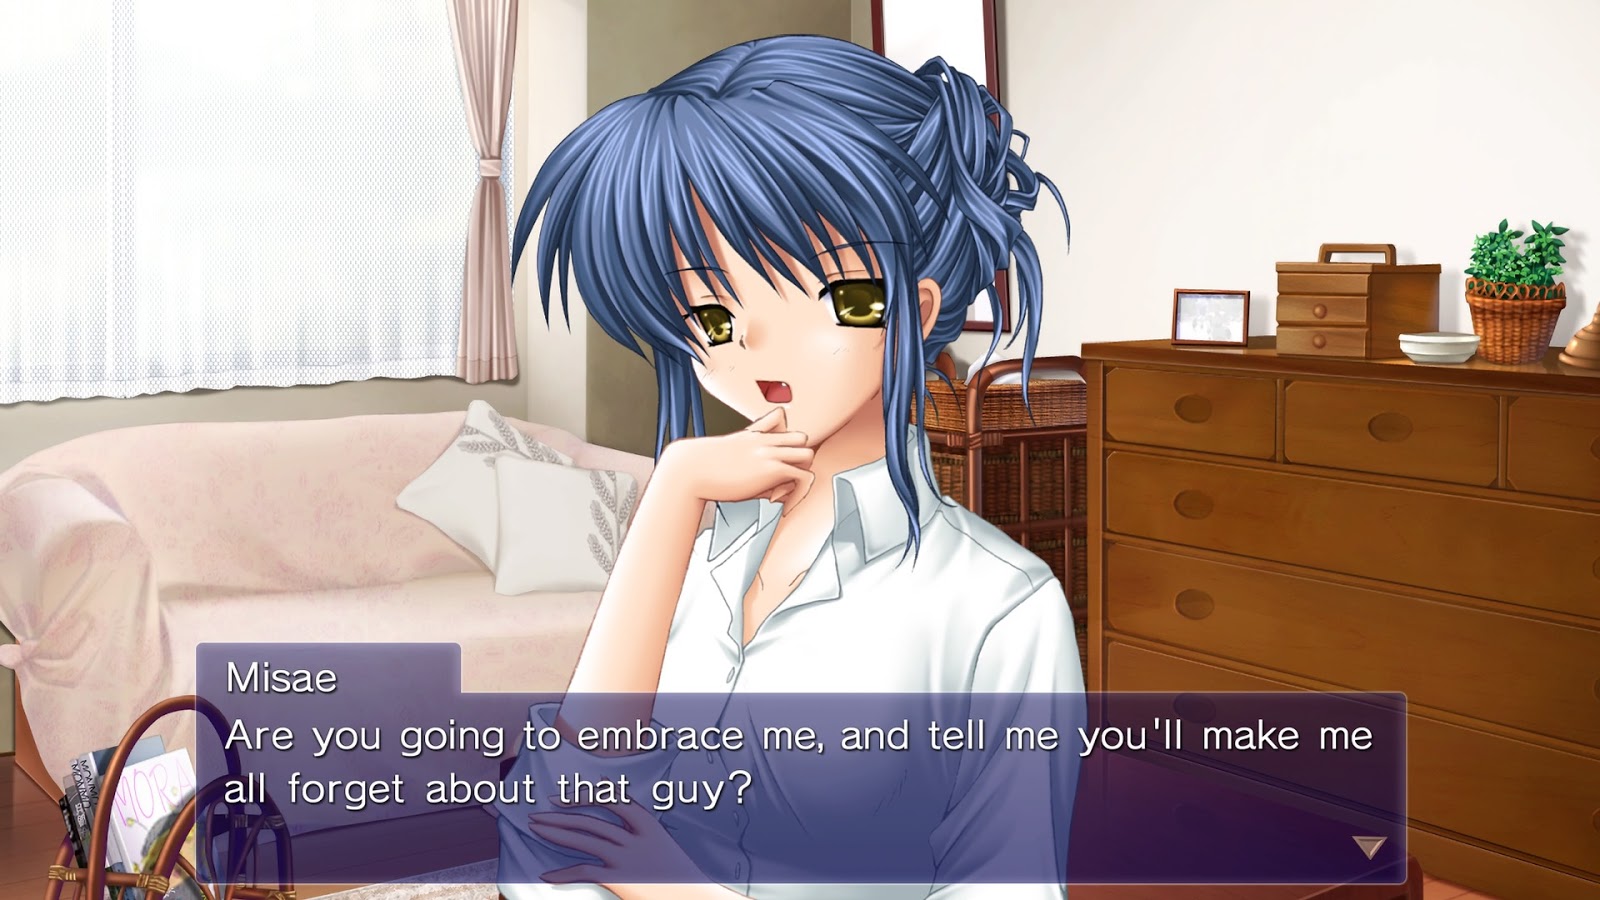 ChCse's blog: Clannad Side Stories (PC)